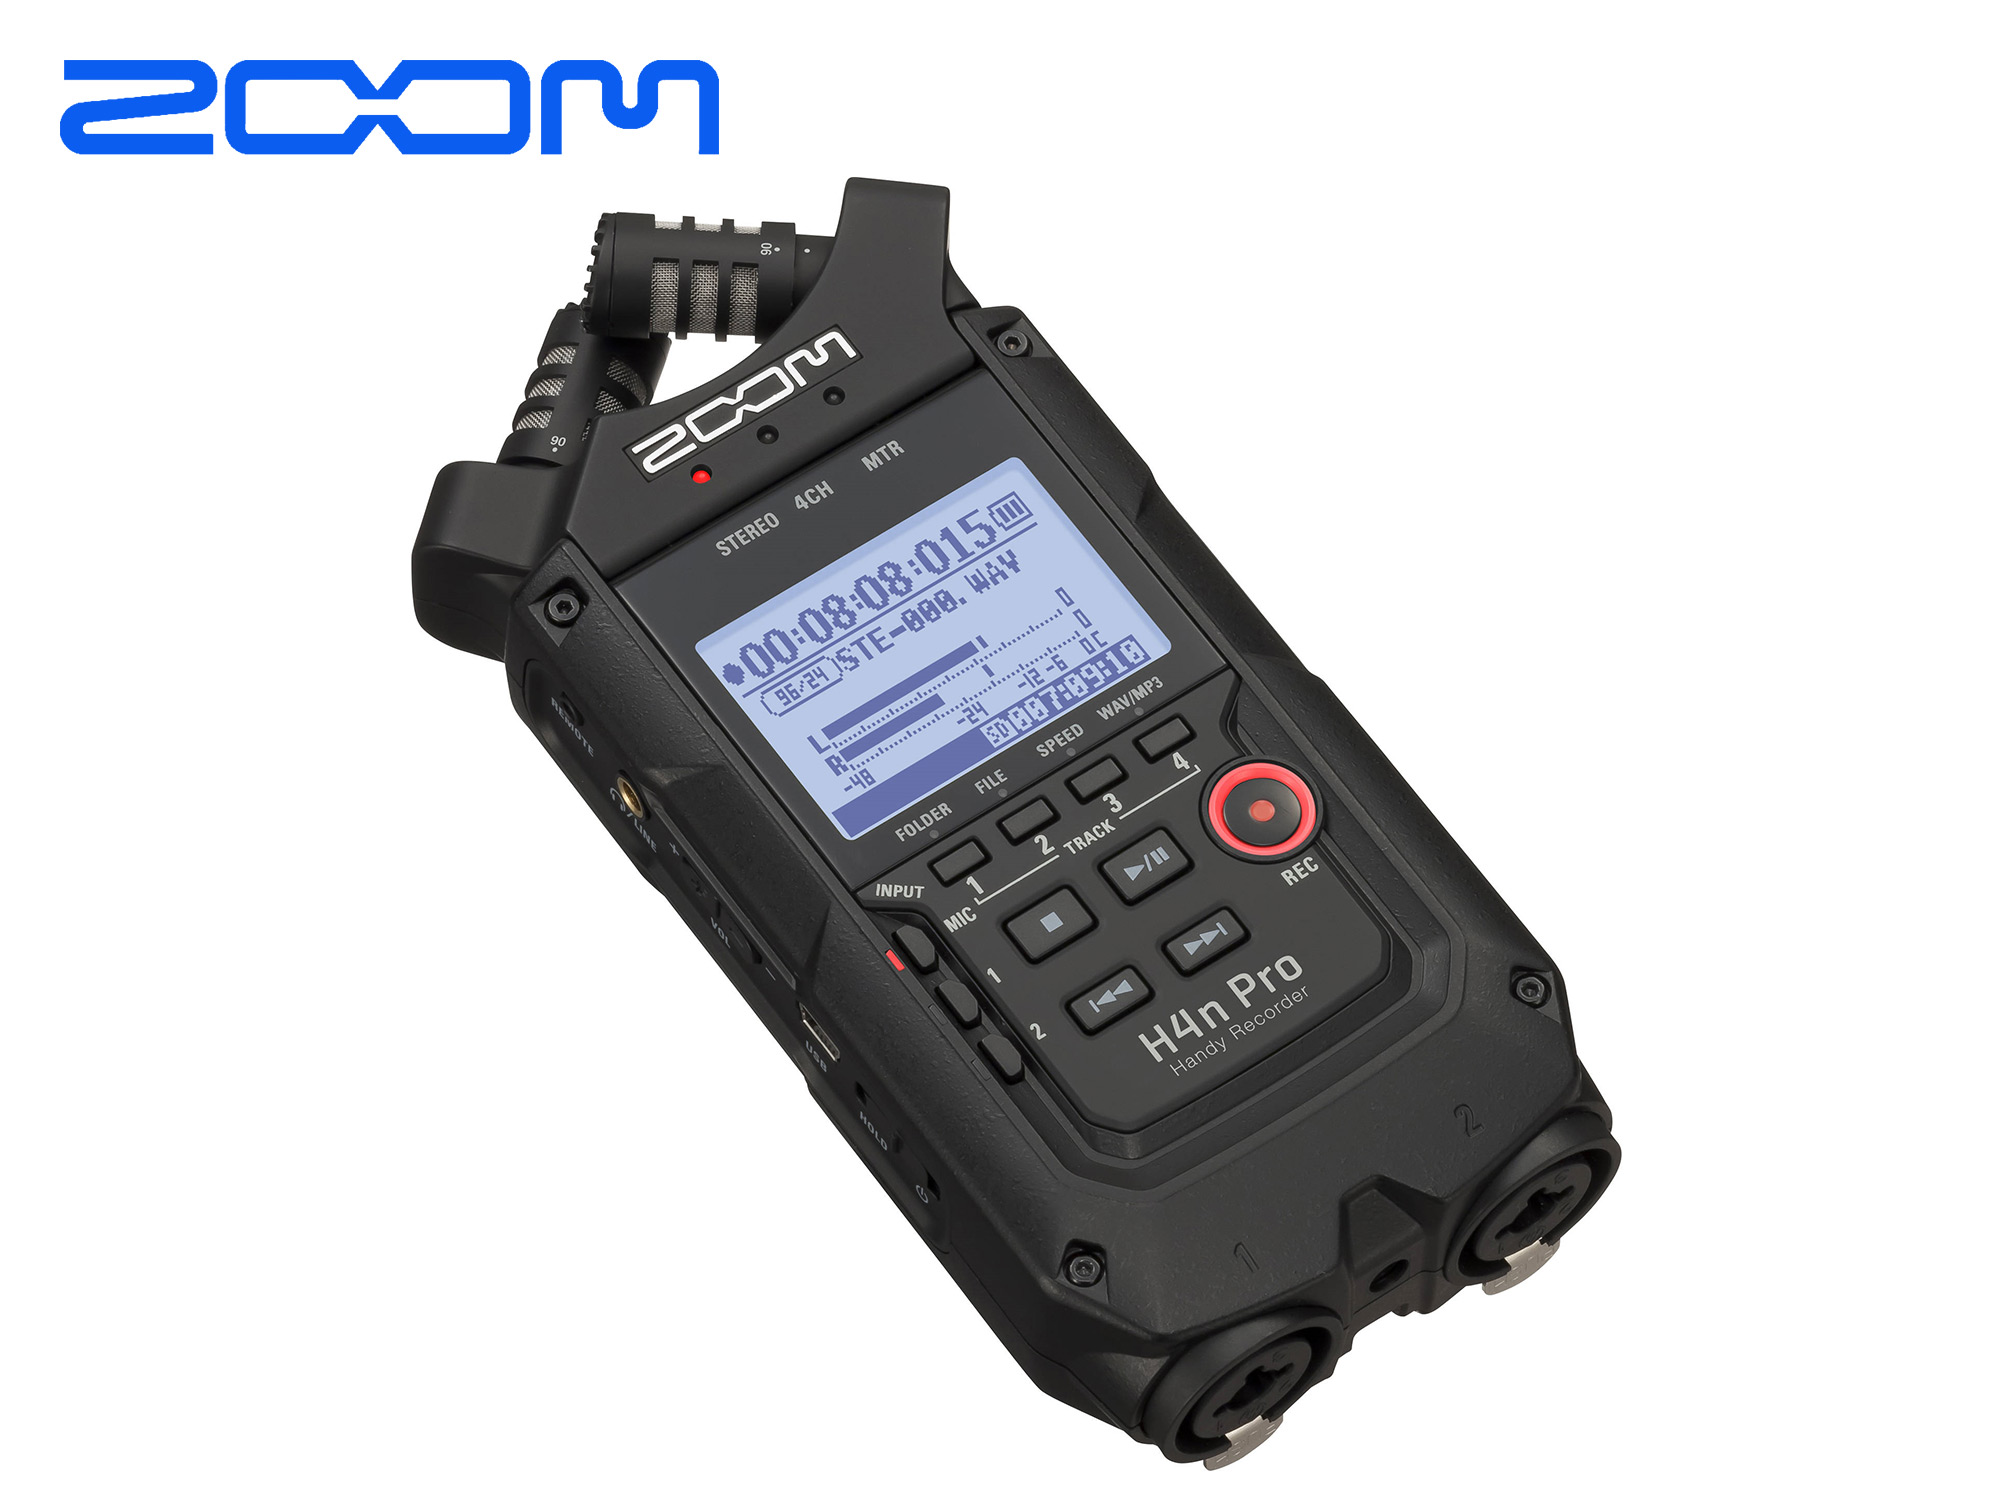 Zoom H4n Pro 4-Input / 4-Track Portable Handy Recorder with Onboard X/Y Mic Capsule (Black)